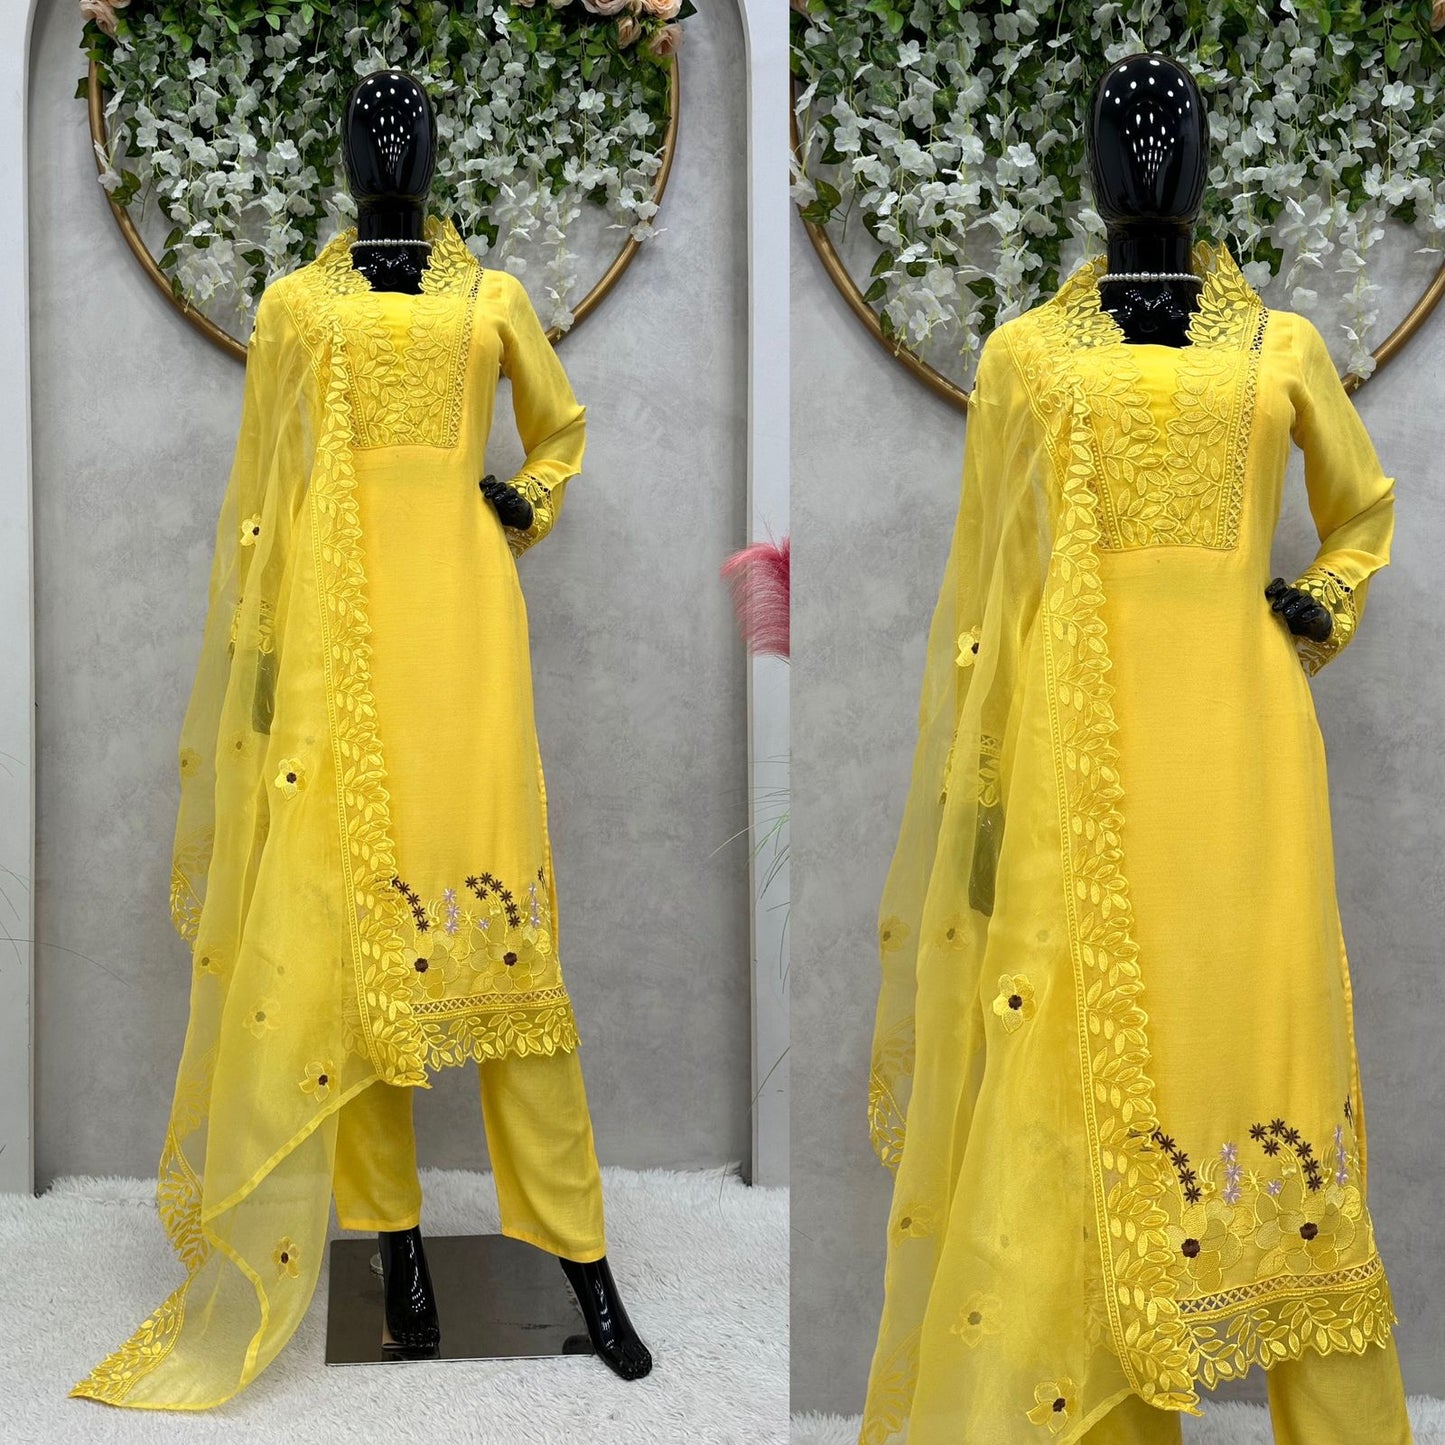 Haldi Speical Yellow Stitched Salwar Suit For Function Wear